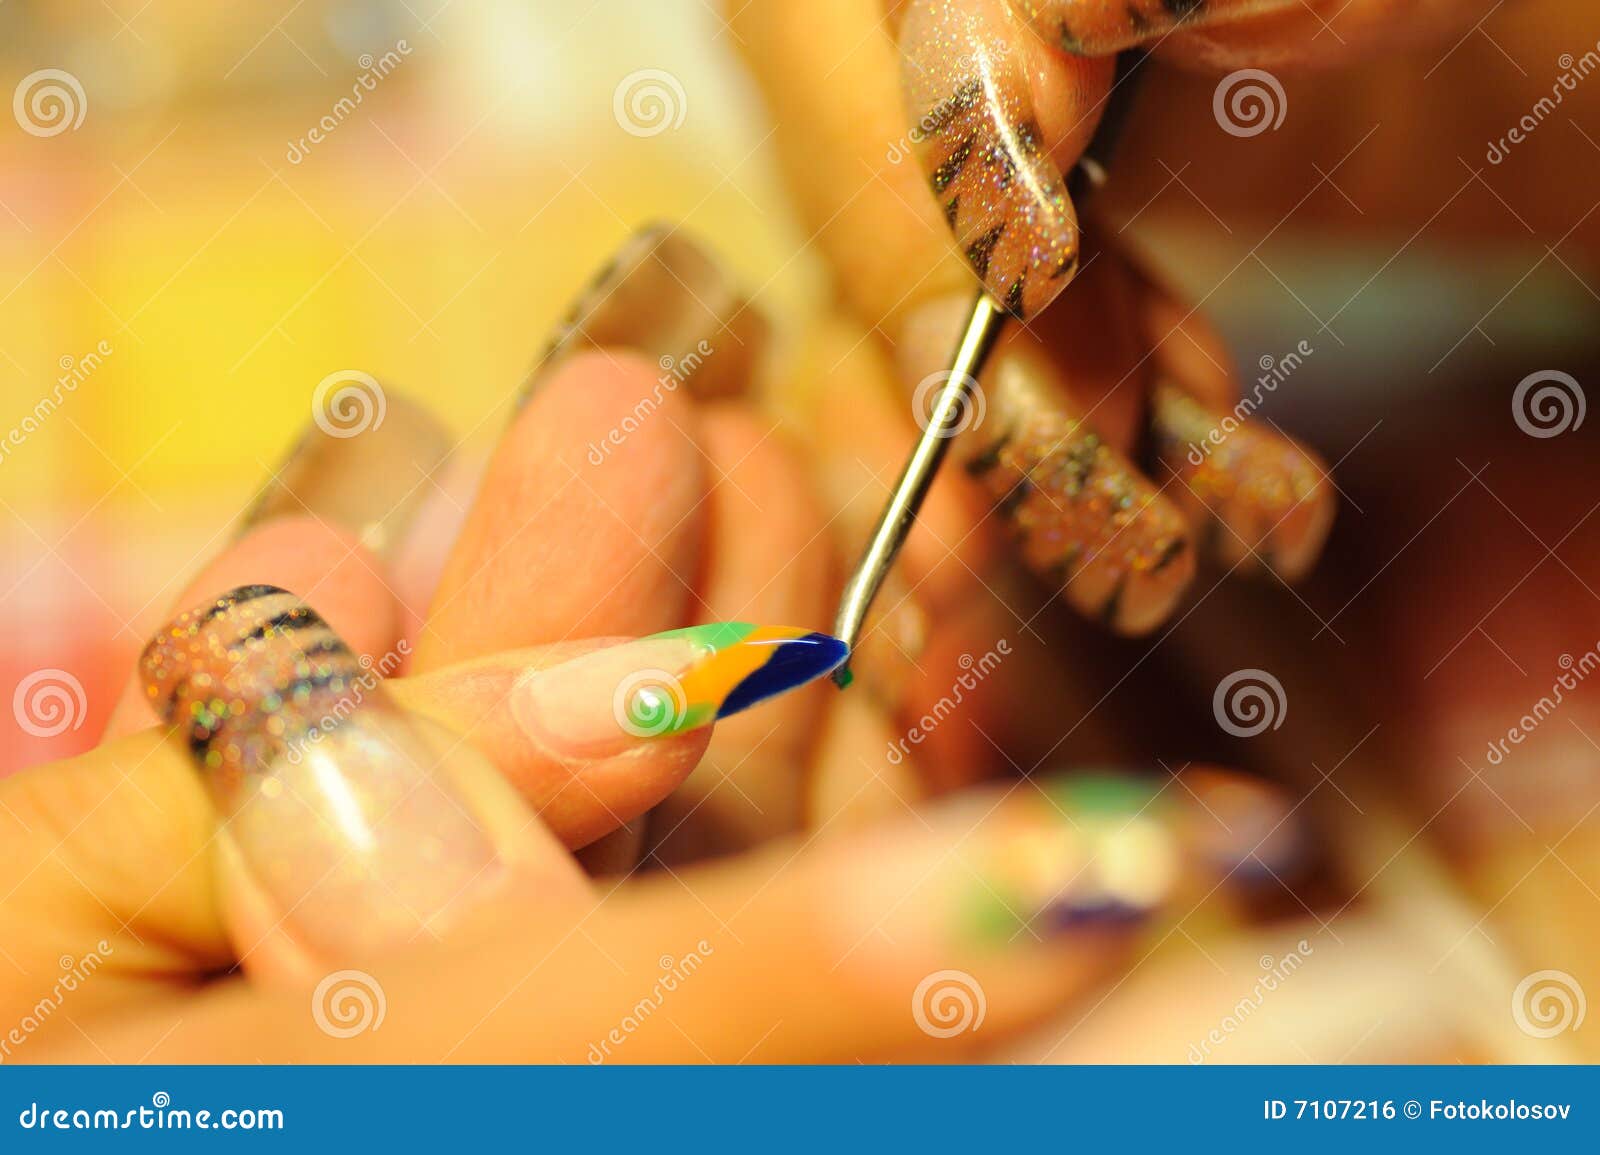 Drawing on a nail stock photo. Image of paint, dark, brush - 7107216